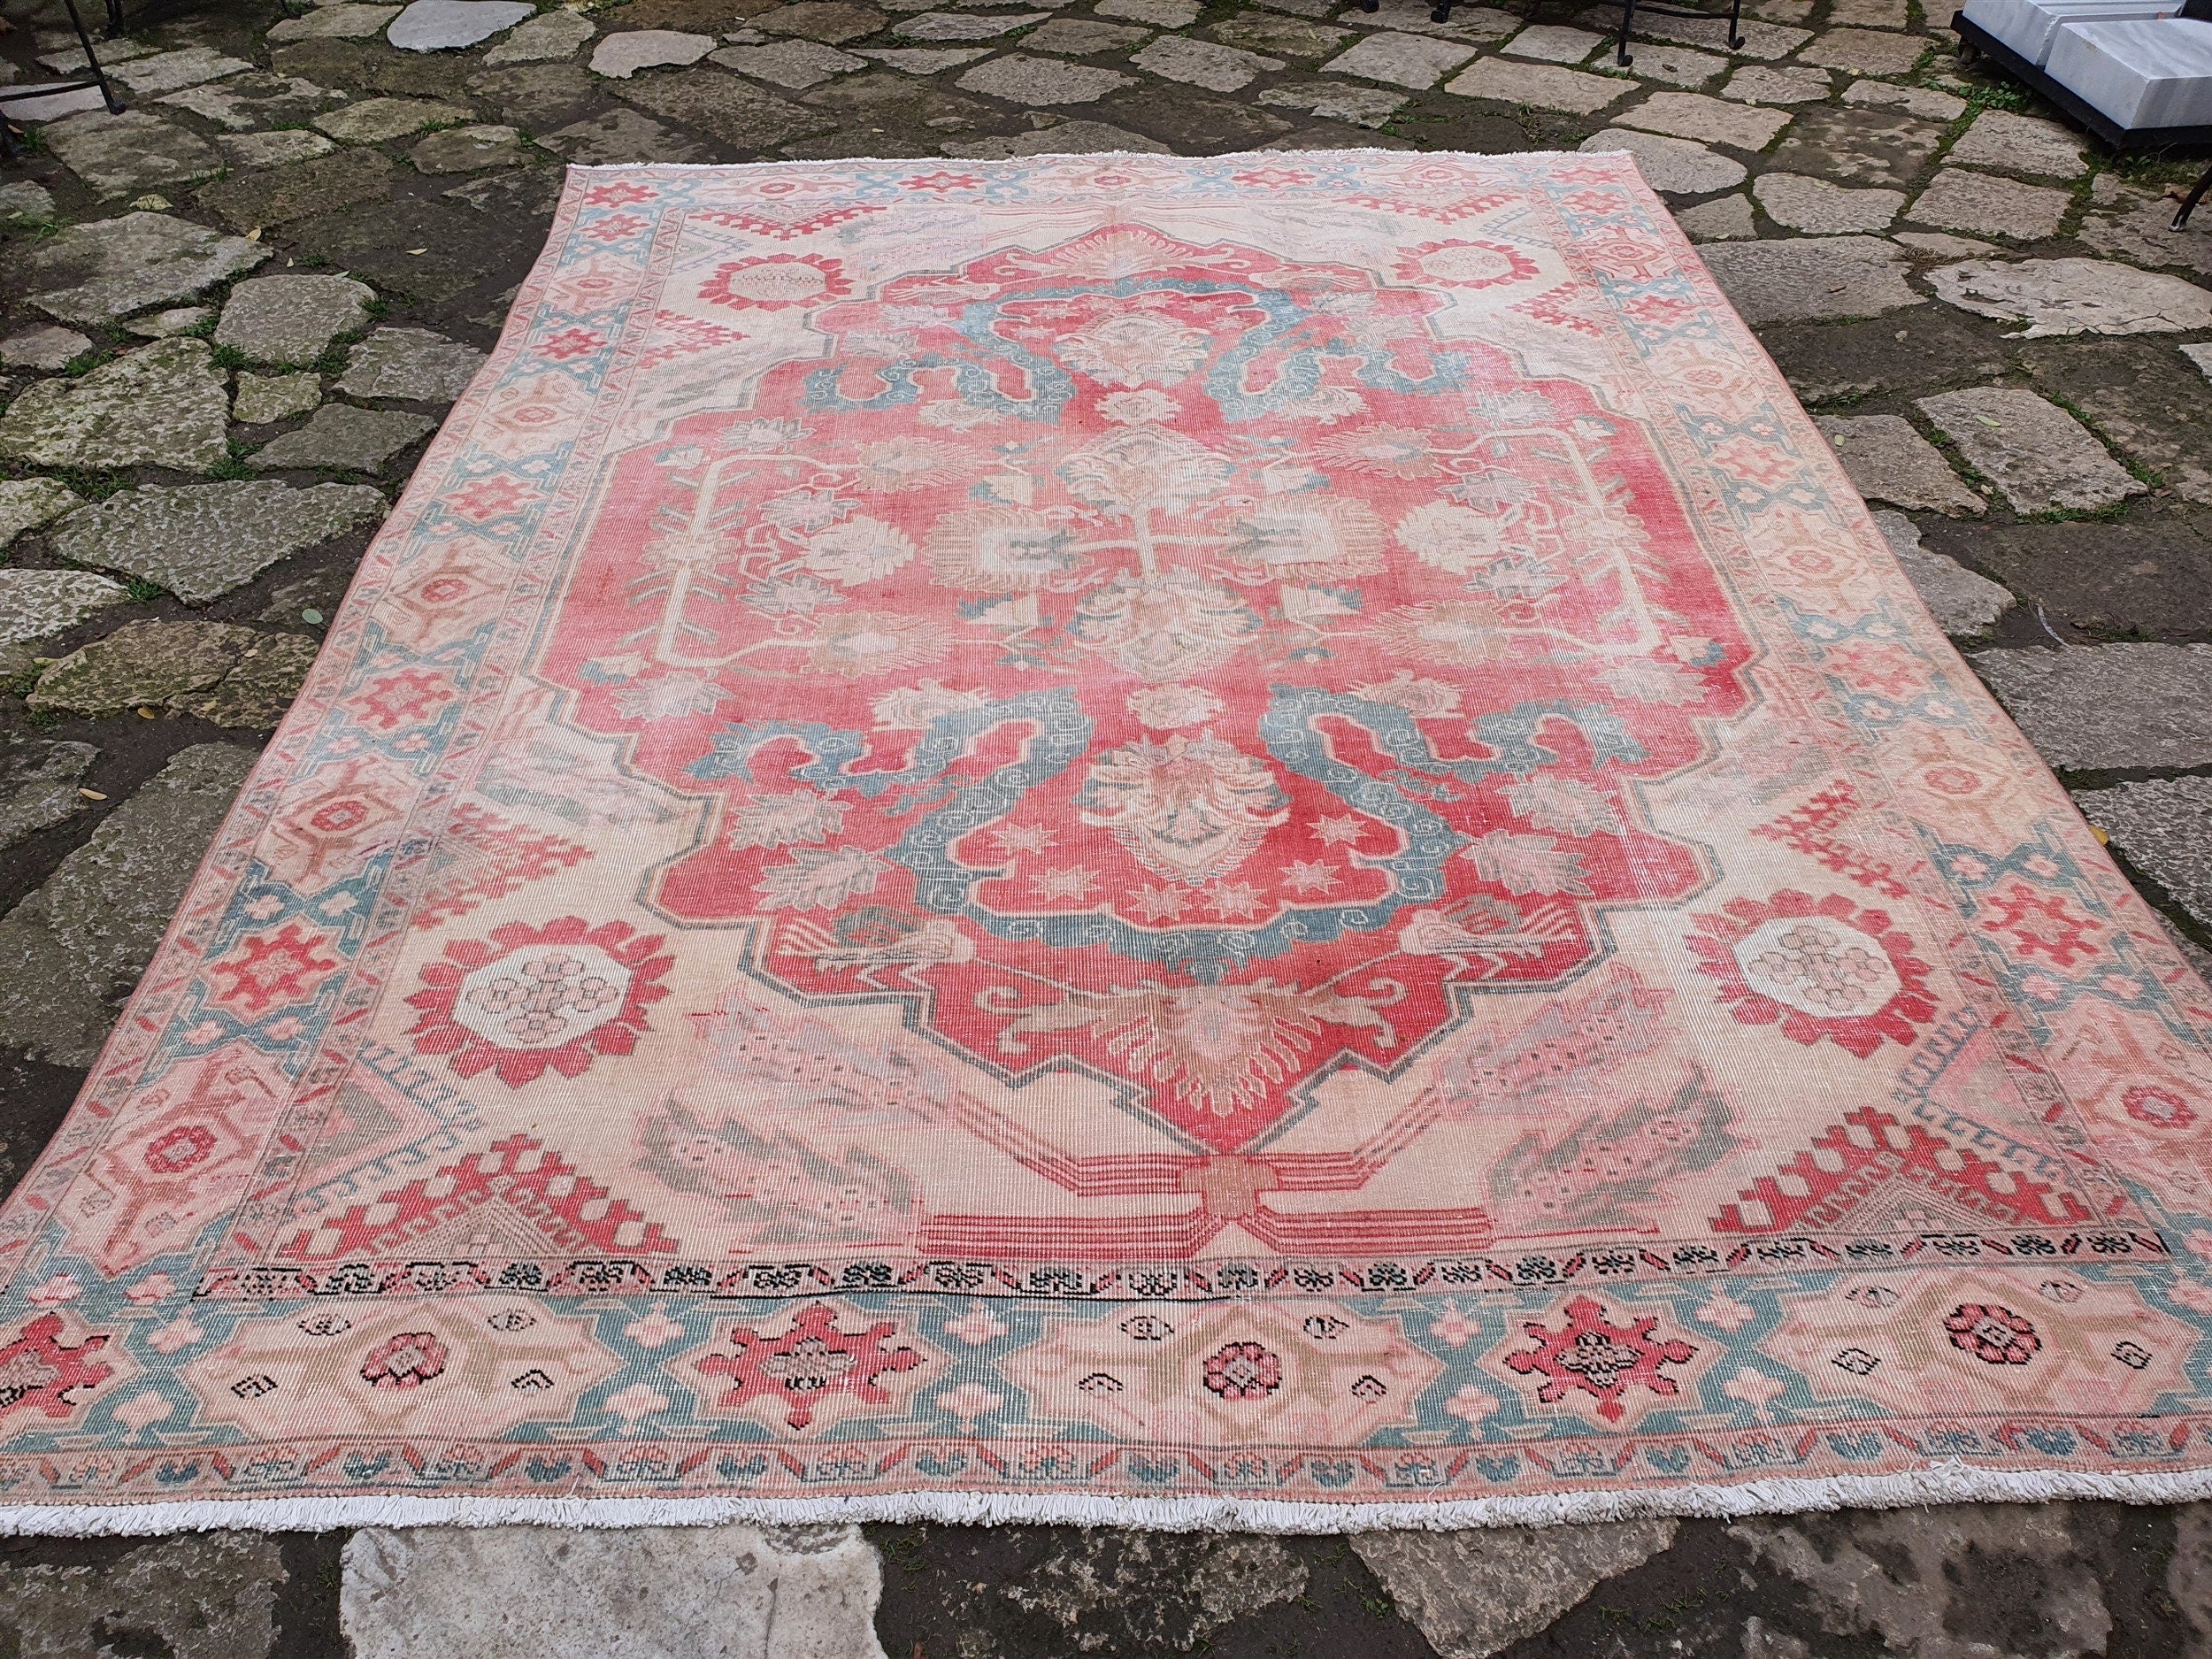 Oversized Persian Rug 11 x 7 ft, Large Pale Pink Blue White Recycled Oriental Design Vintage Rug Handmade  Wool Bohemian Moroccan Style Rug